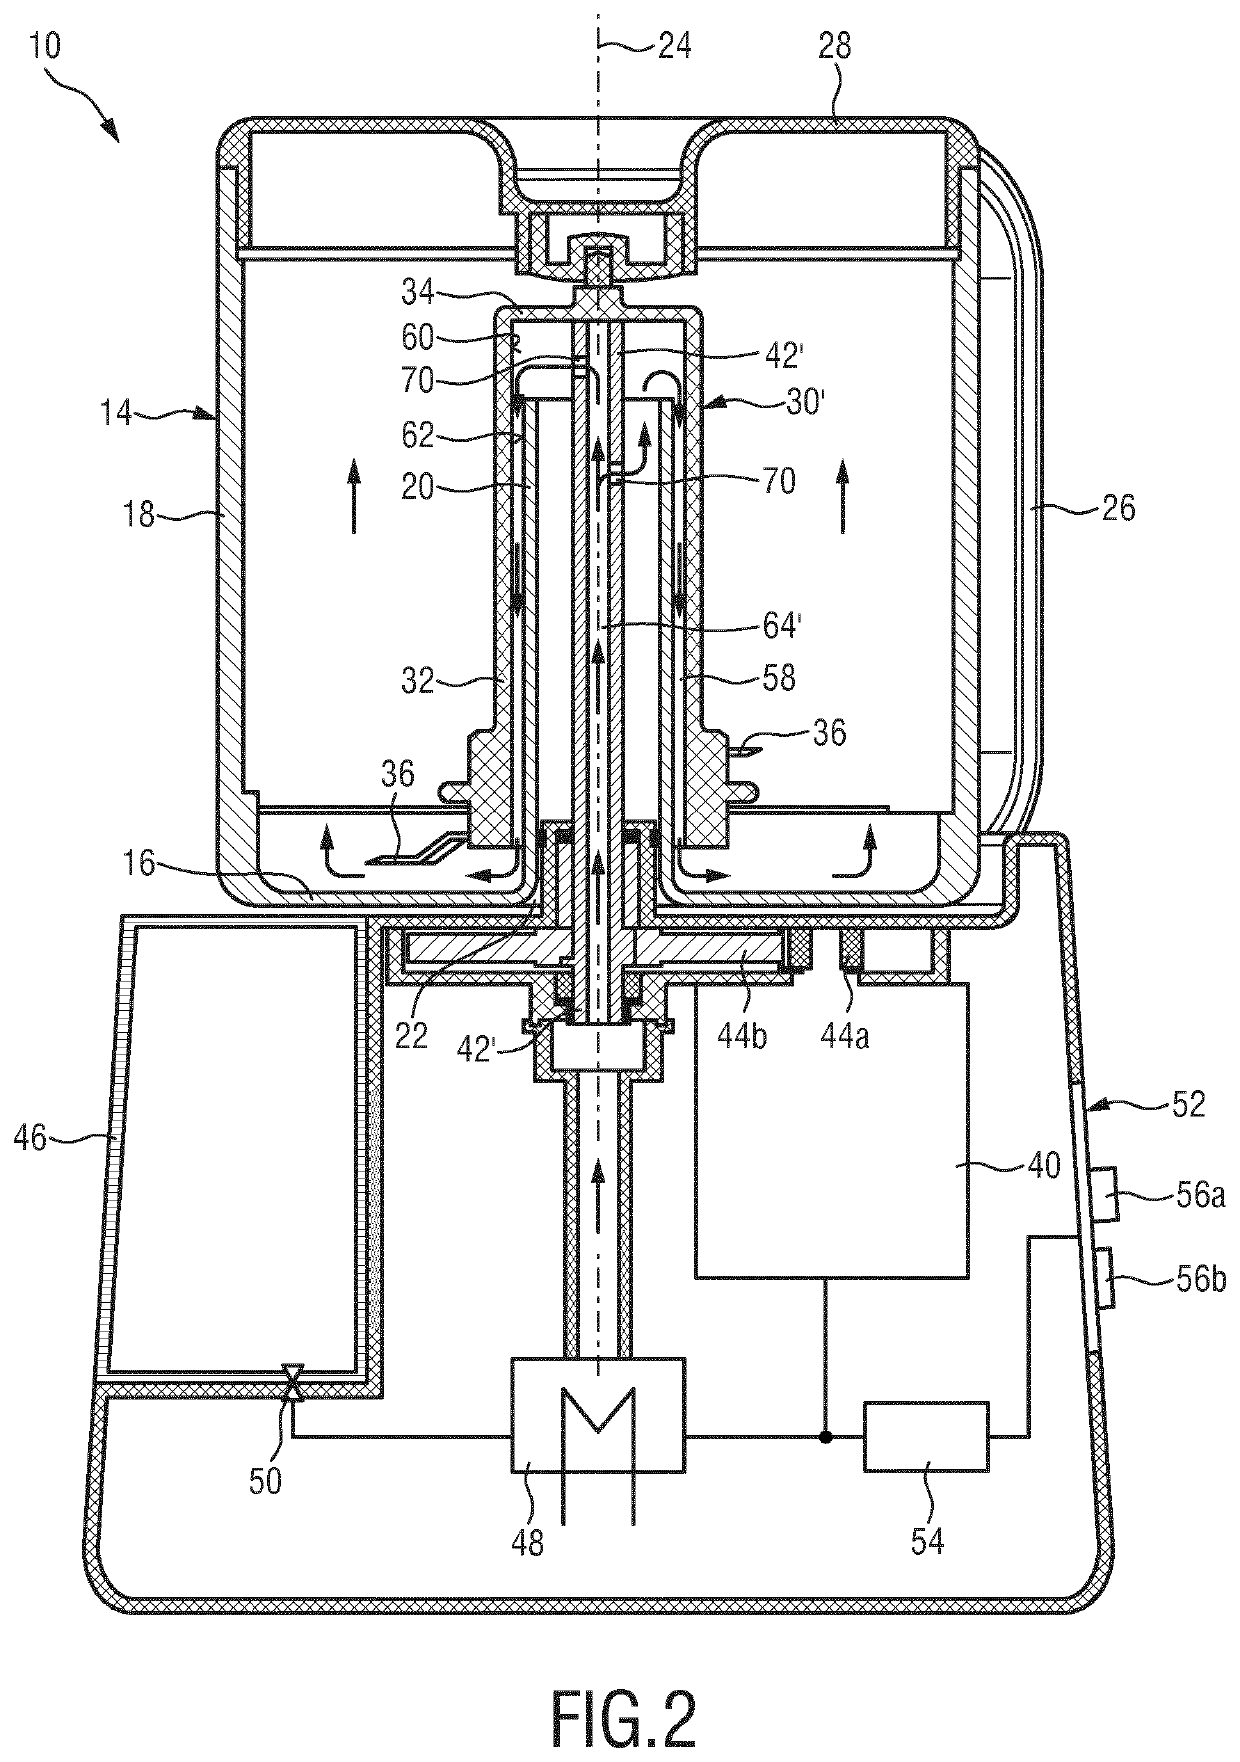 Apparatus for steaming and blending a food product